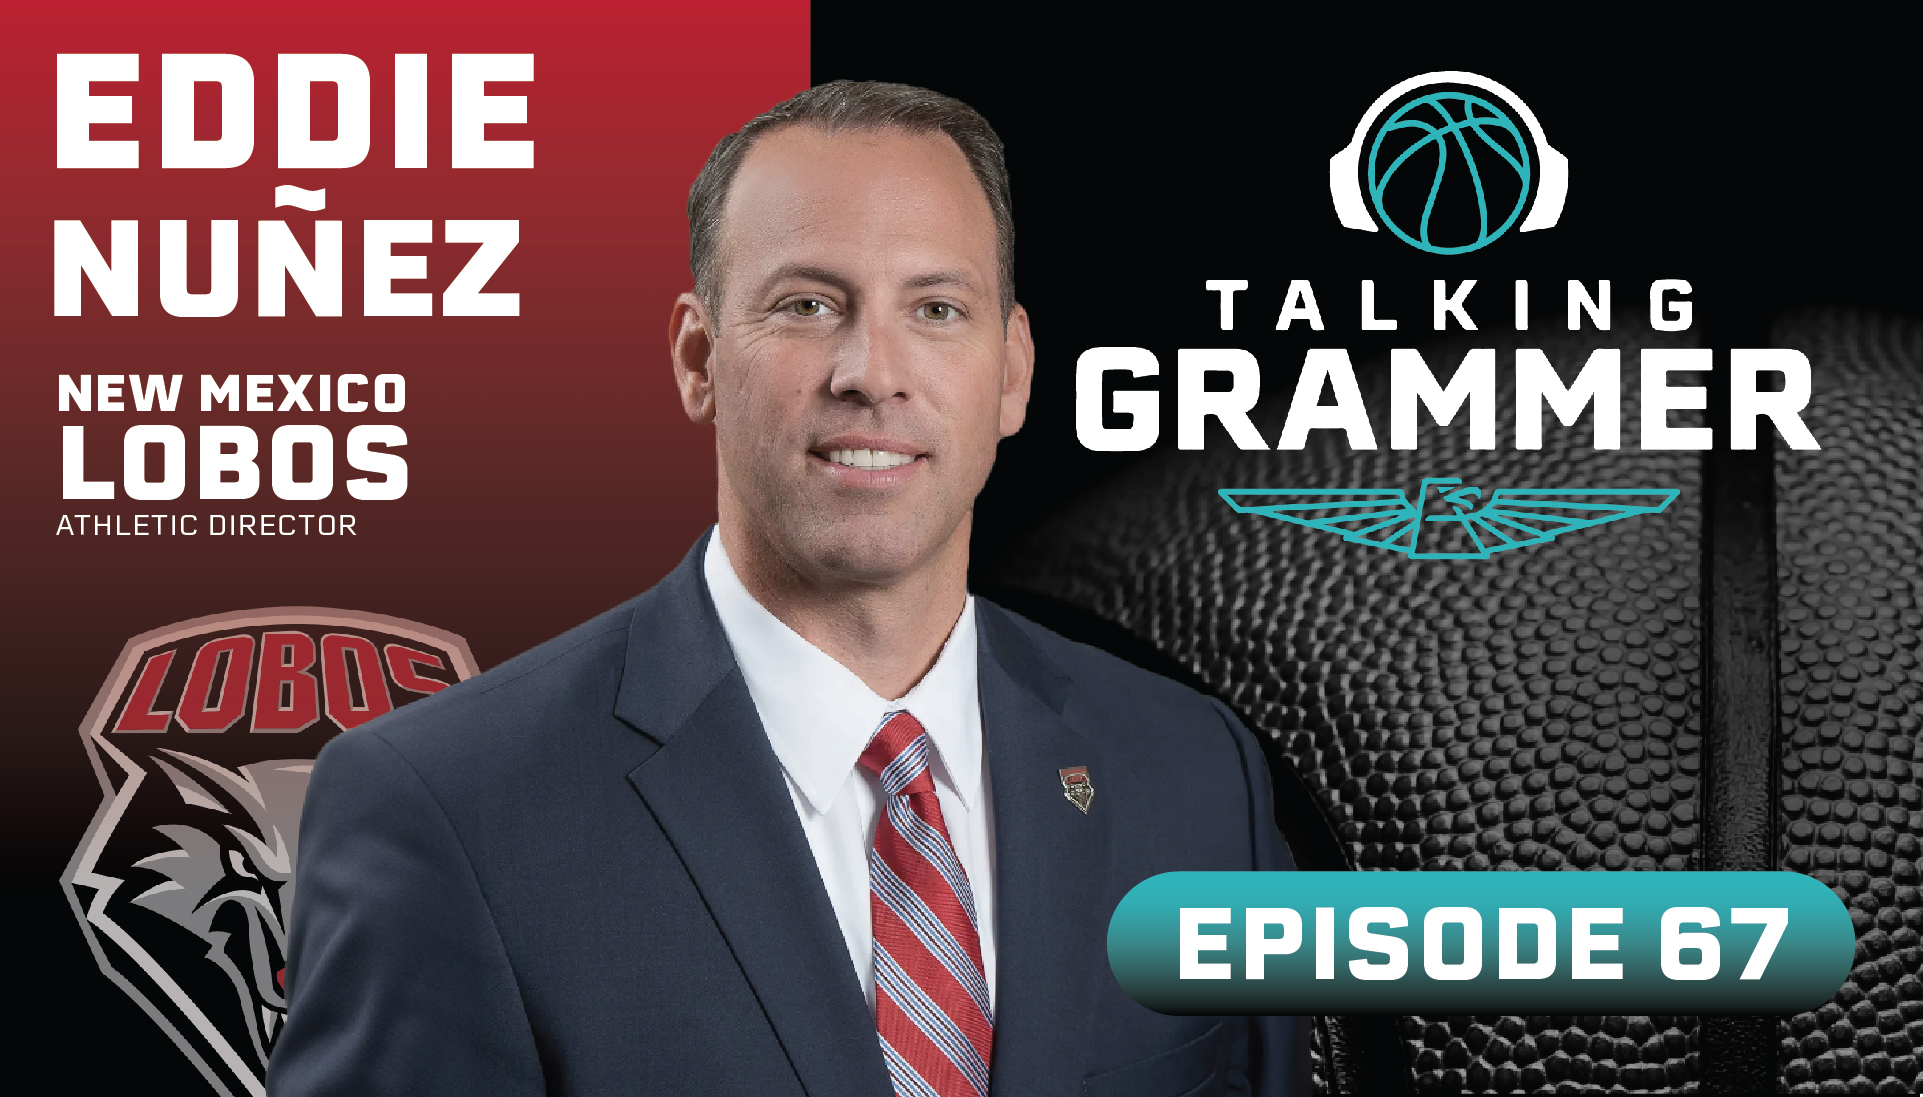 Featured image for “Talking Grammer, Ep. 67: UNM Athletic Director Eddie Nuñez”